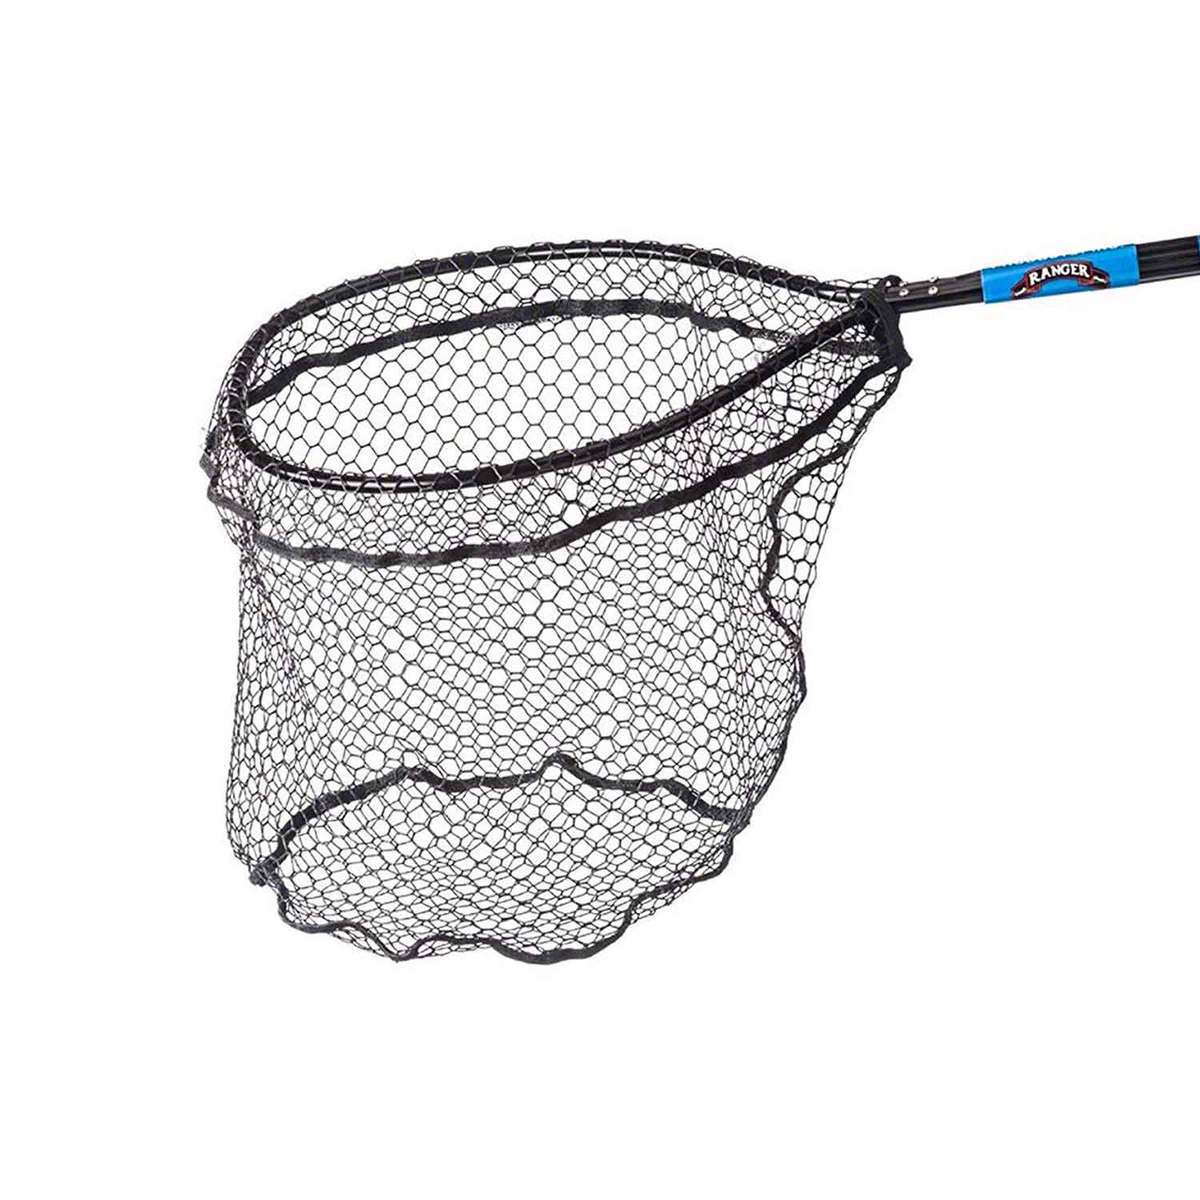 Beckman Fixed Handle/Rubber Landing Net – Red/Silver, 20in W x